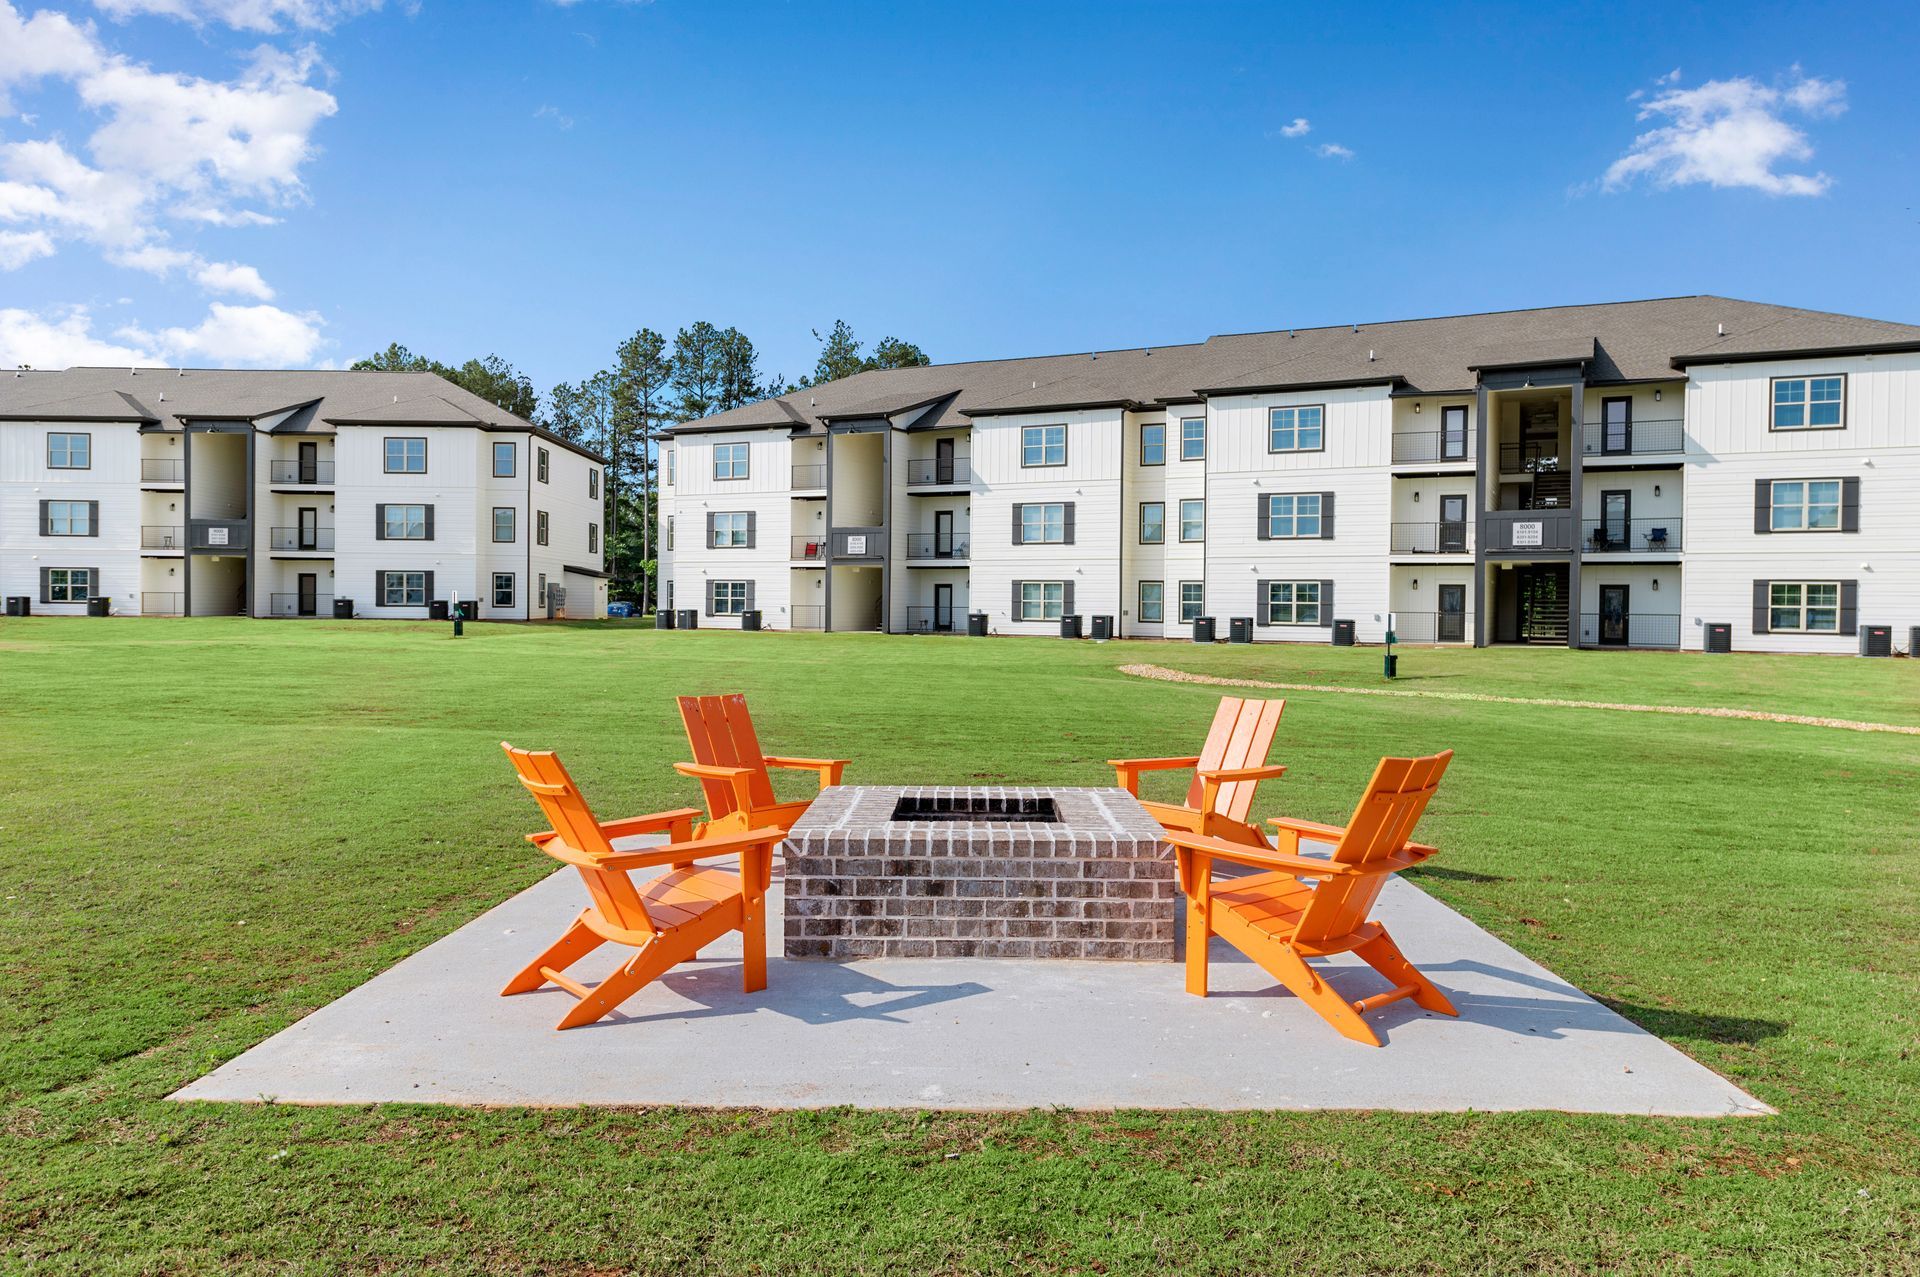 A fire pit with orange chairs in front of the apartment building at Pointe Grand Southlake.